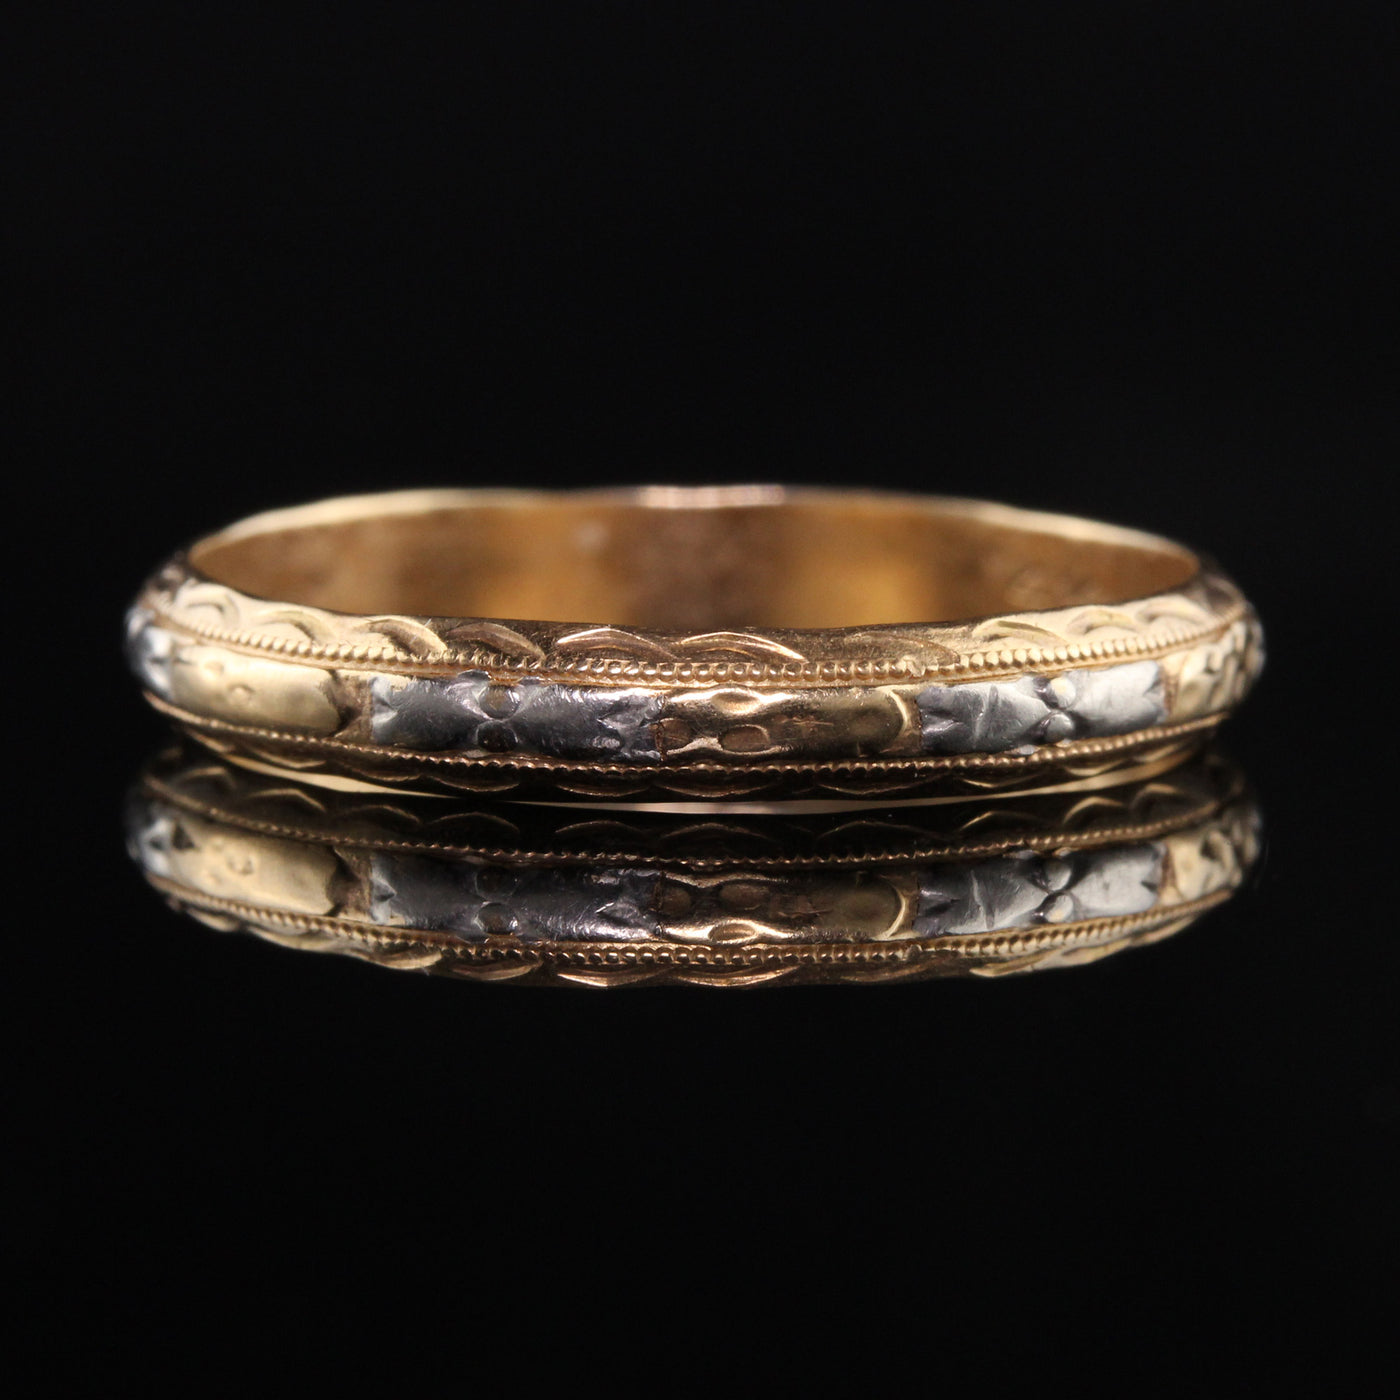 Antique Art Deco 14K Yellow Gold Two Tone Engraved Wedding Band - Size 10 1/2